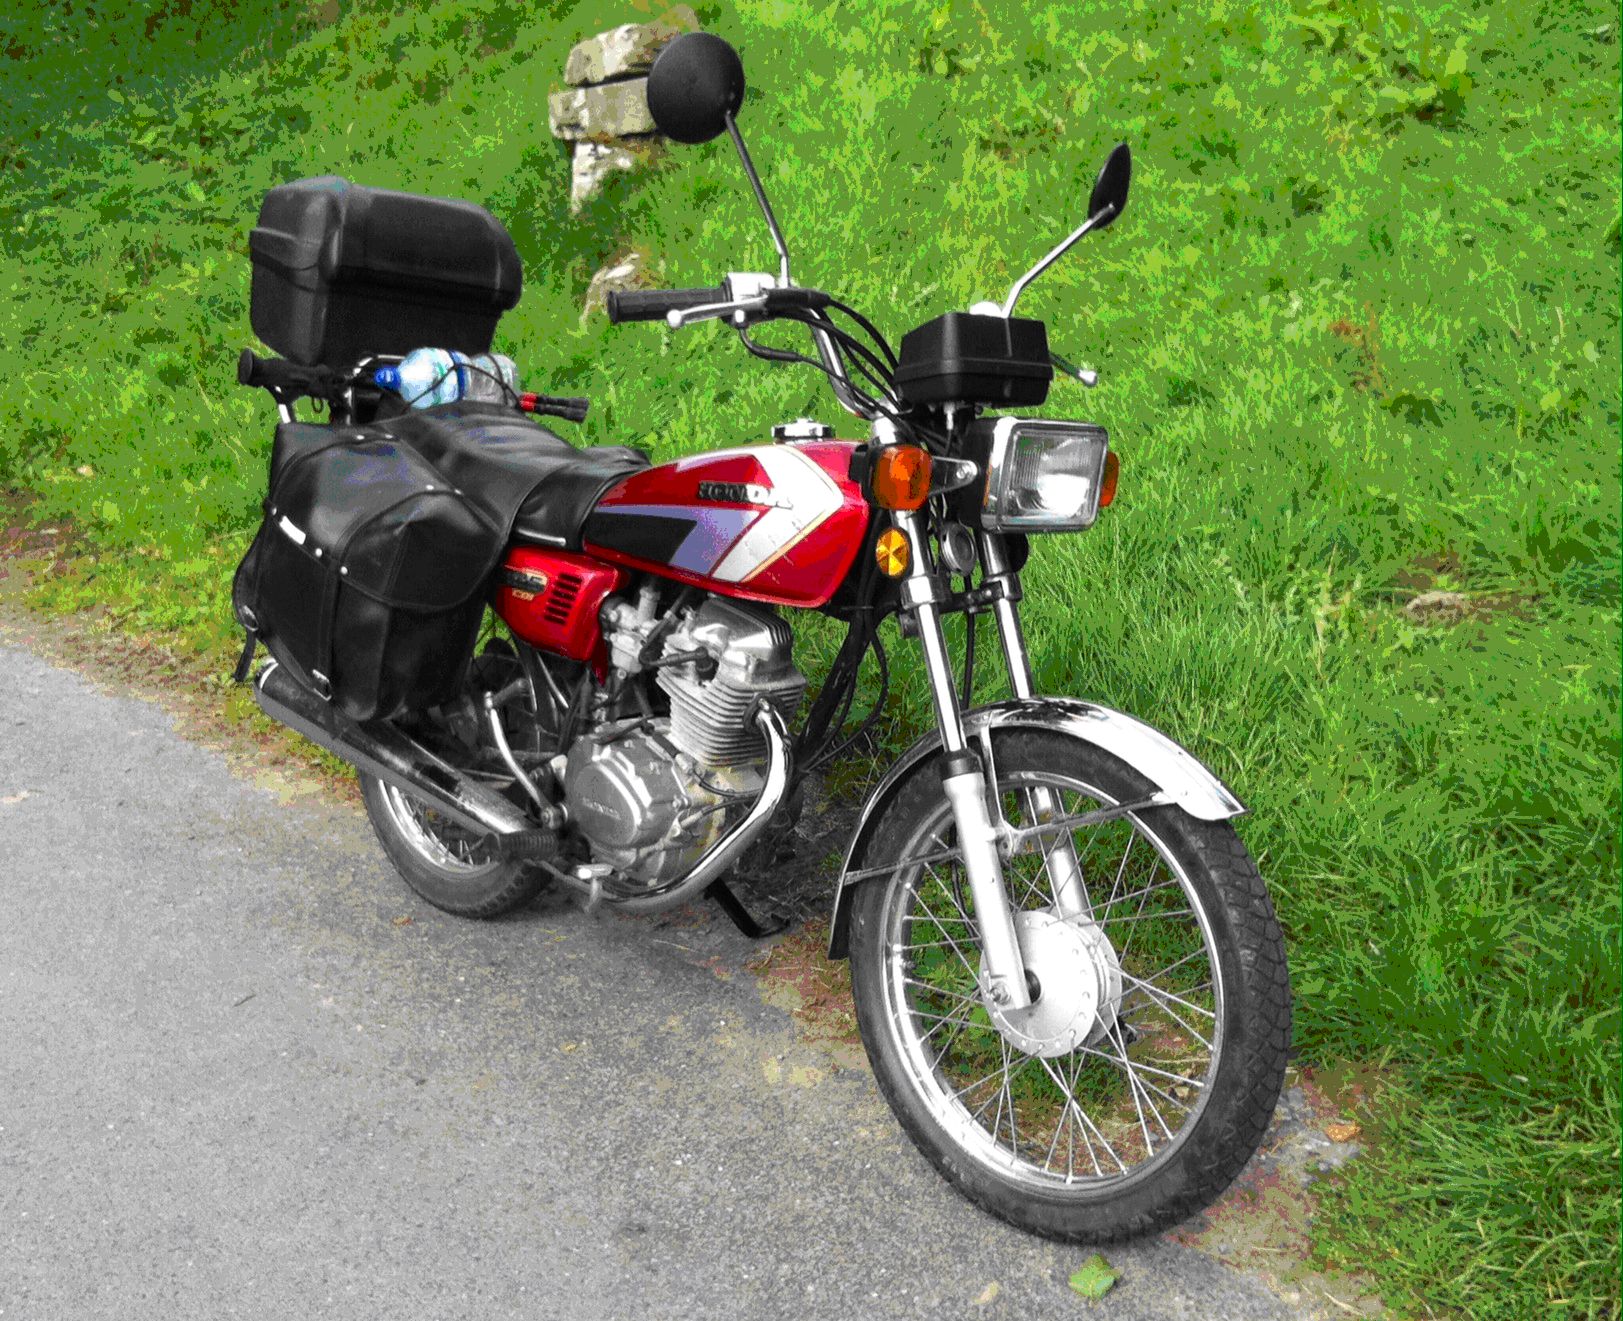 A classic Honda CG 125 in red complete with top box and saddle bags for touring